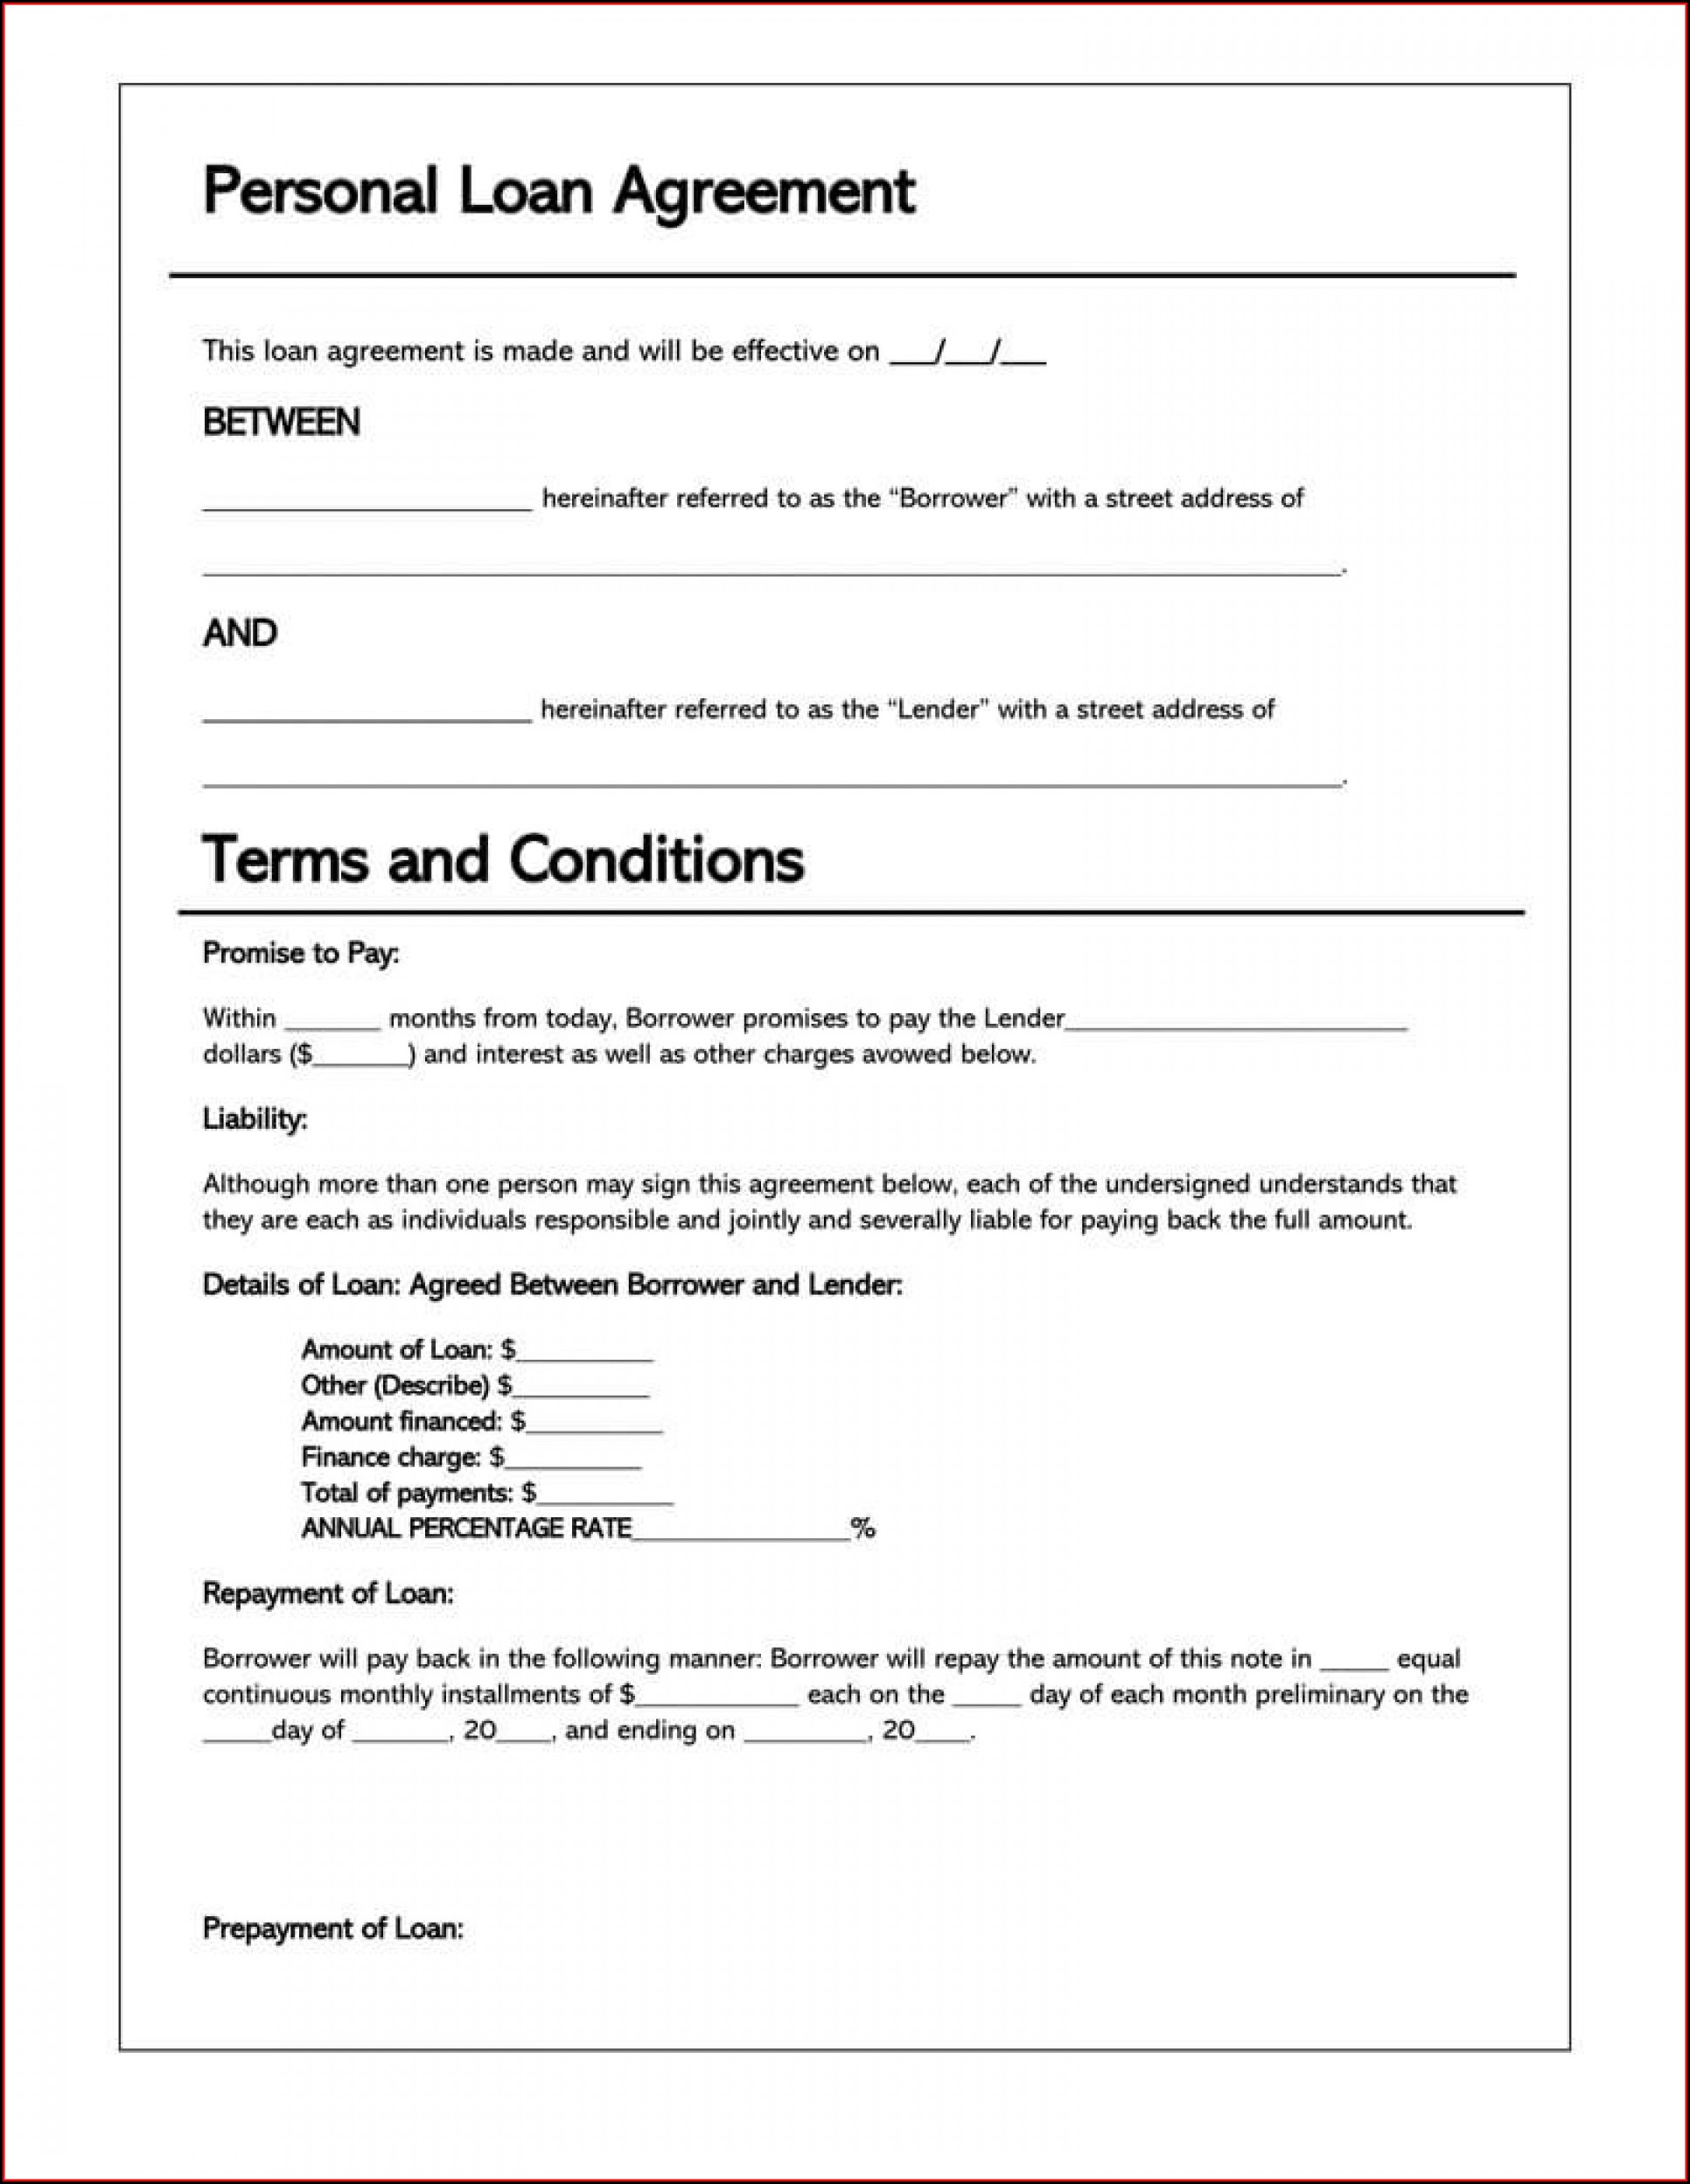 Personal Loan Contract Template Canada